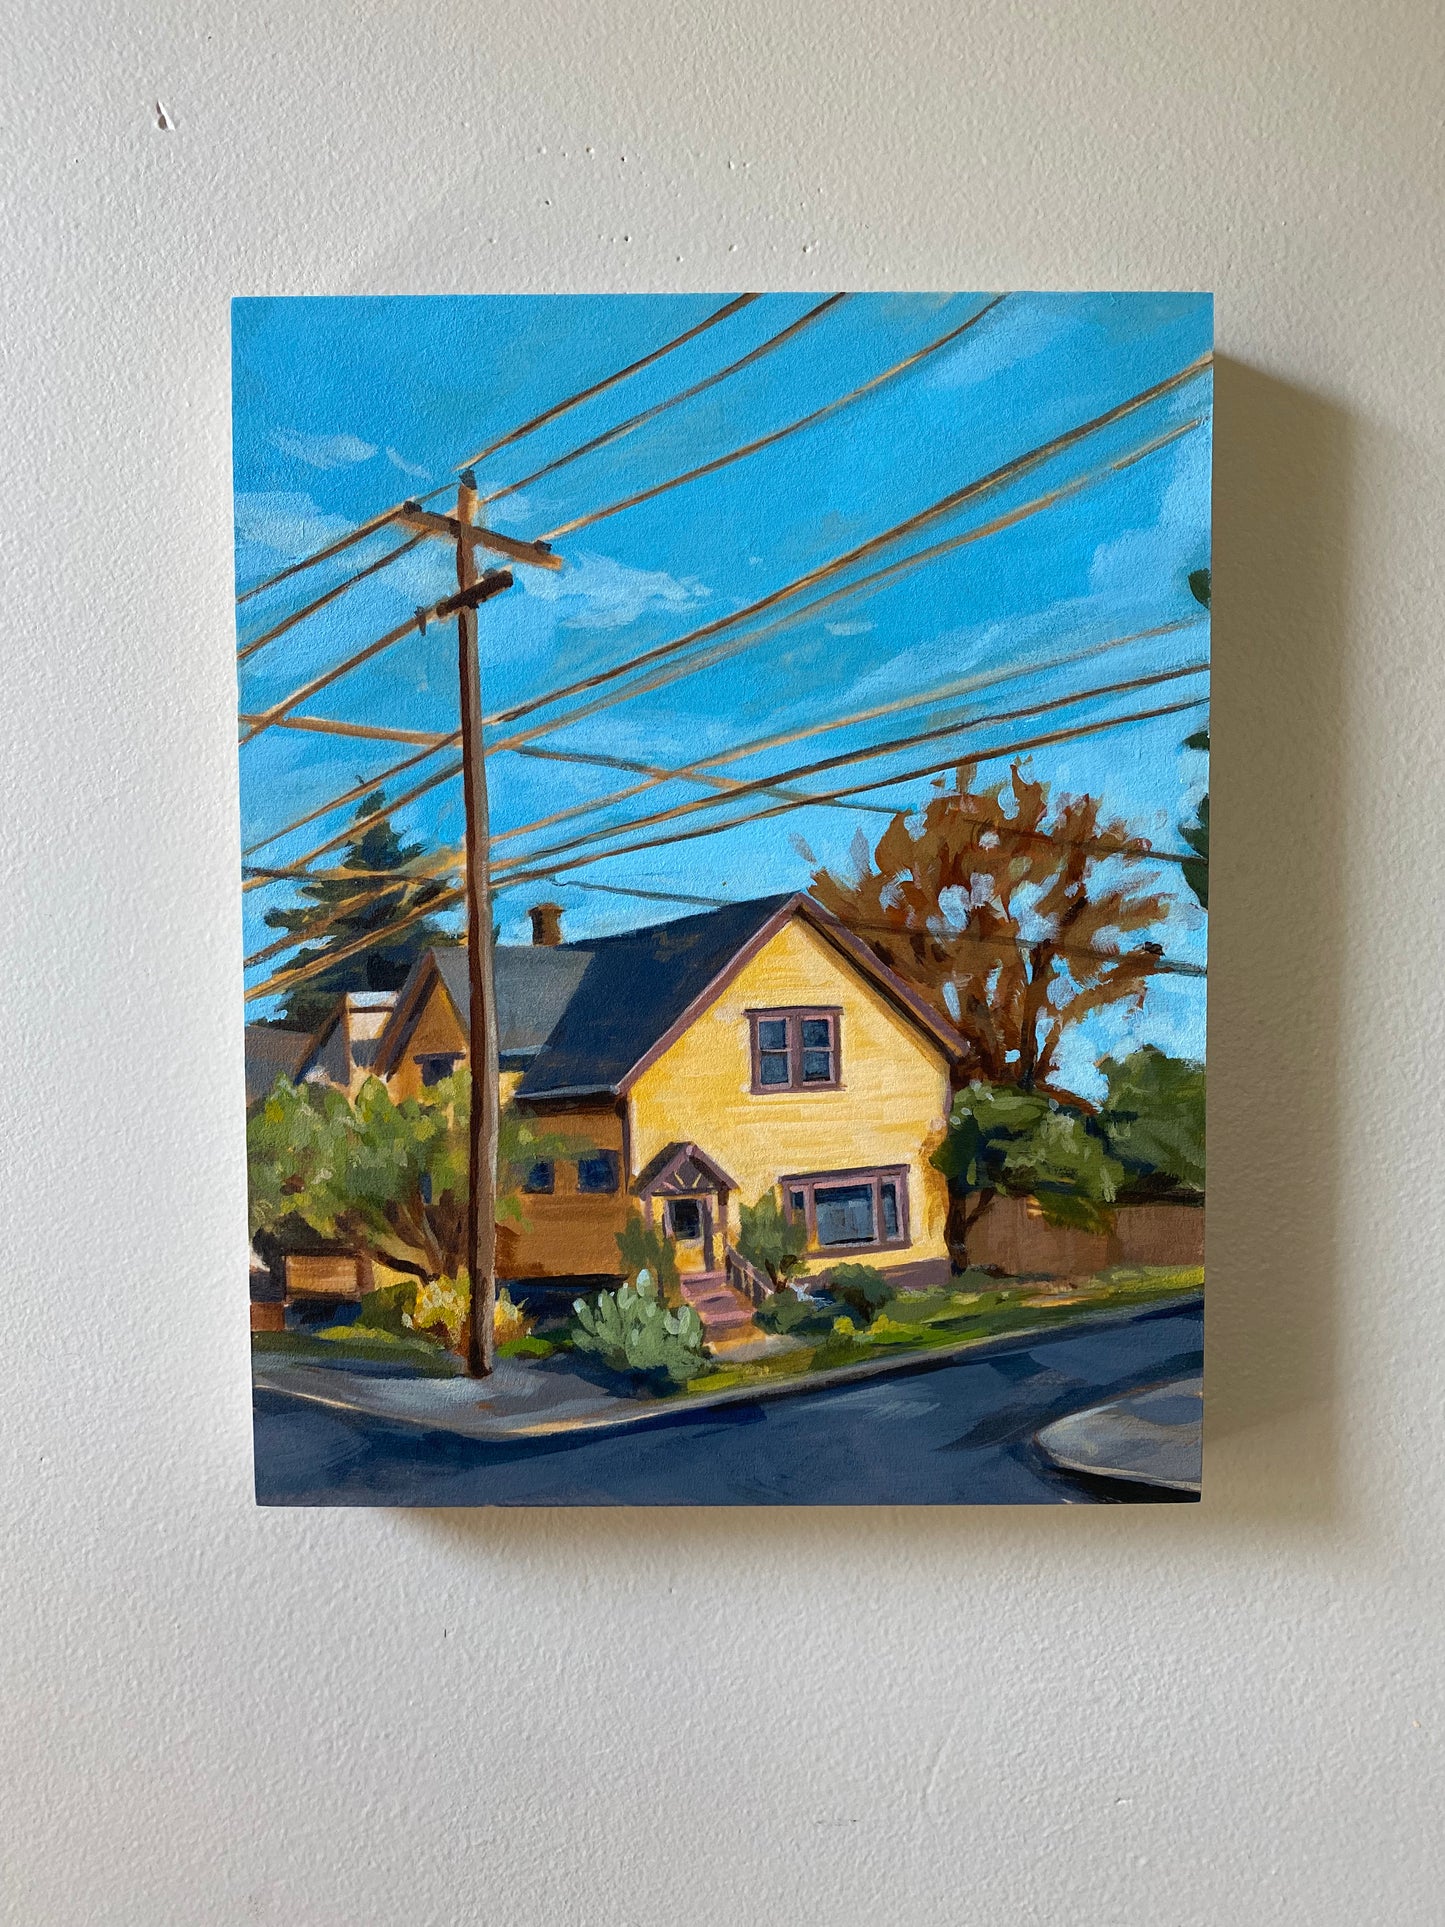 Unframed 8x10 painting of a yellow house in a Portland neighborhood